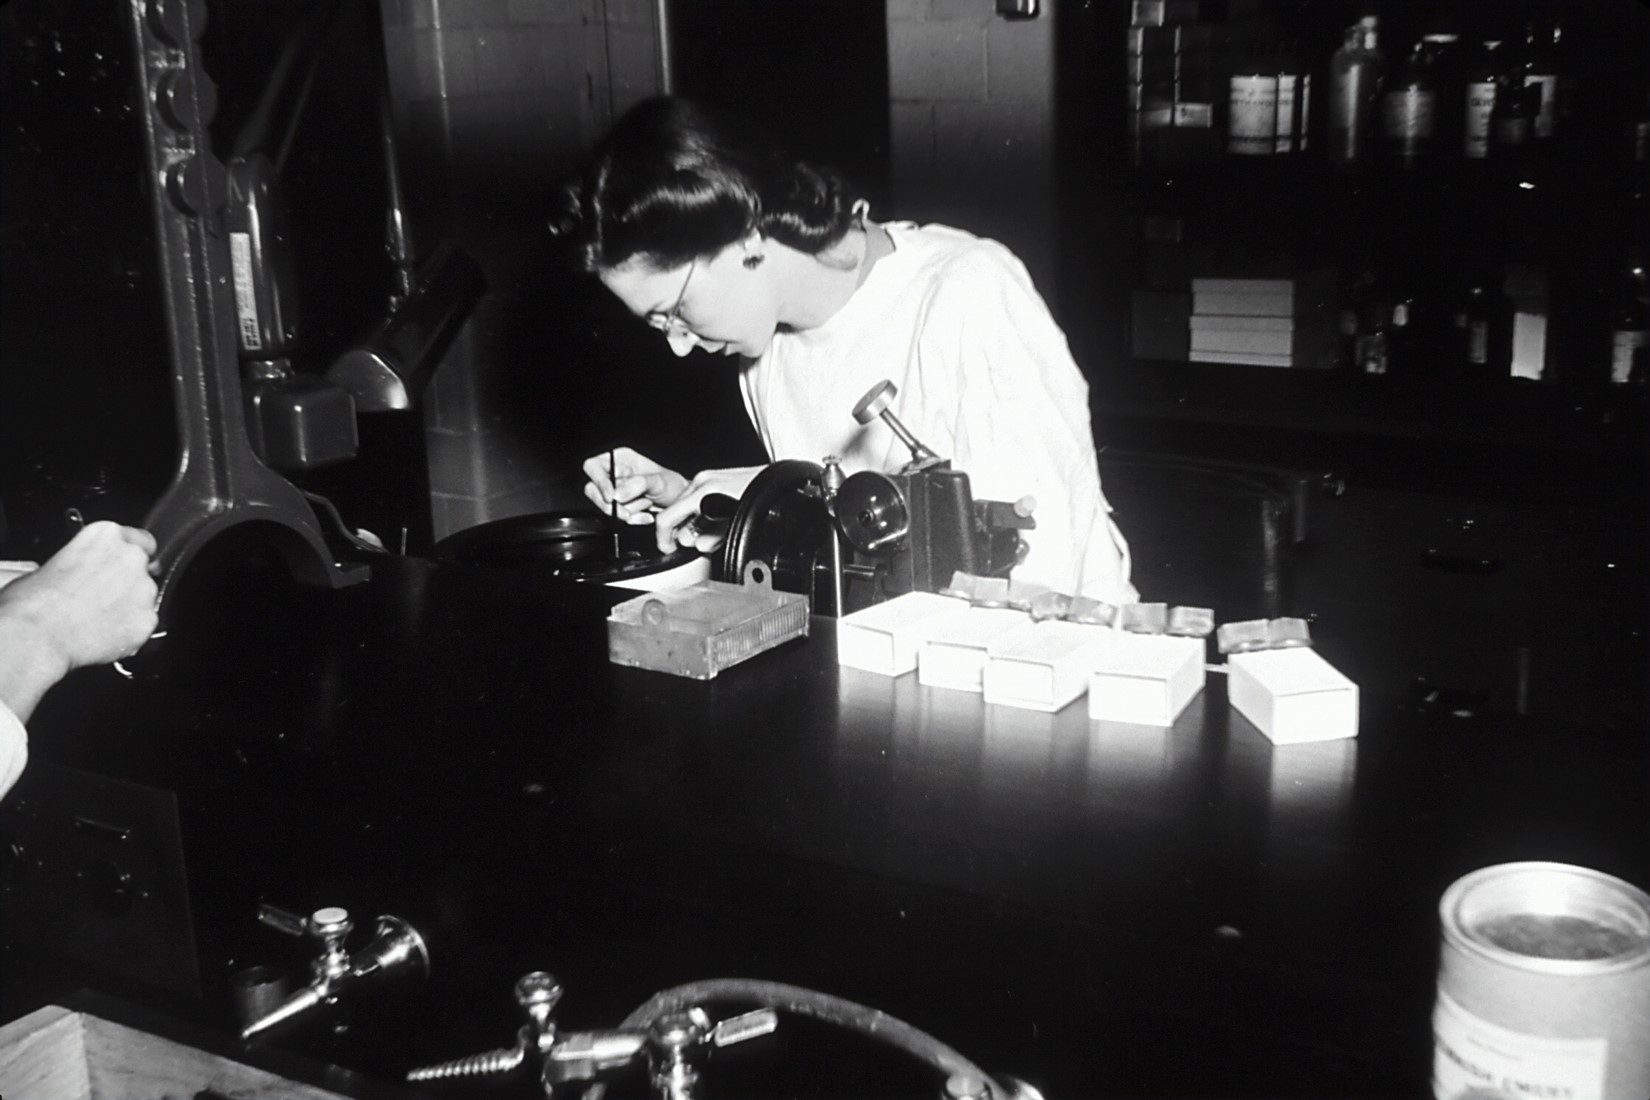 Black and white photograph of a woman working in a laboratory to prepare microscope slides.